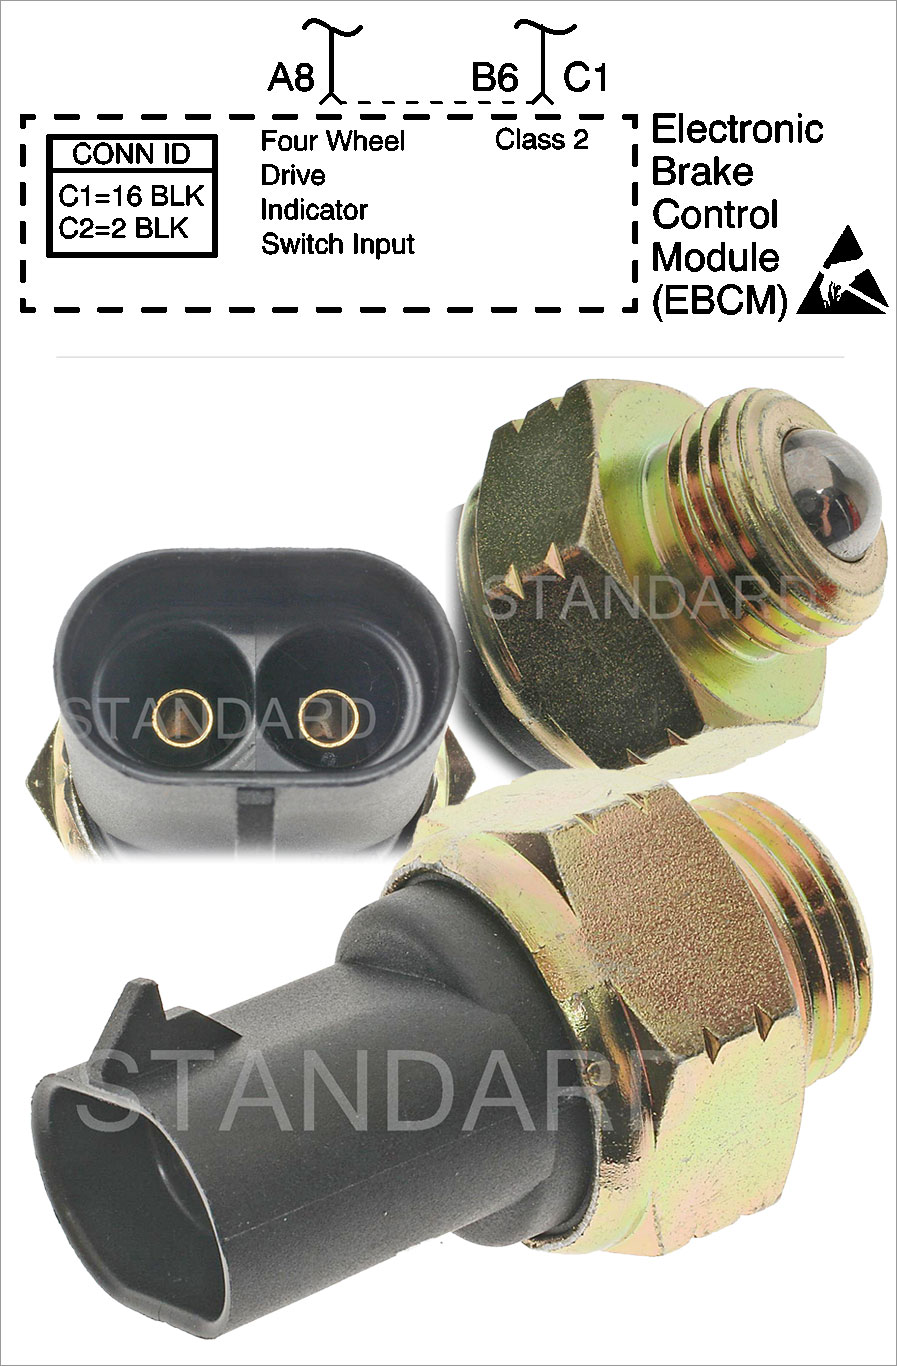 Standard Motor Products 4WD Indicator Switch used on 1983-2005 GM vehicles